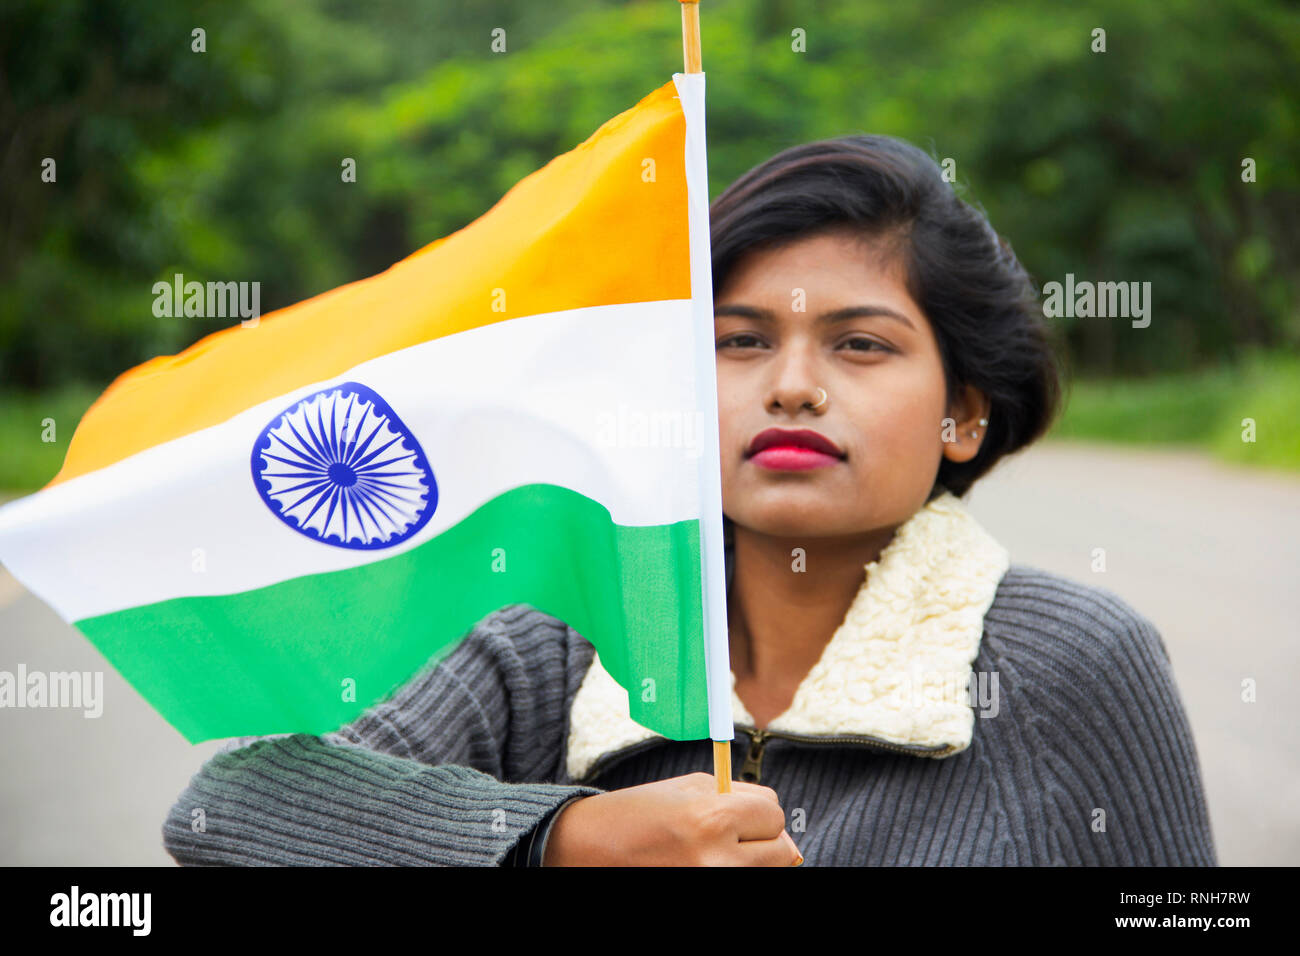 Close-up of young Indian girl holding Indian National flag and looking at it with pride, Pune Stock Photo